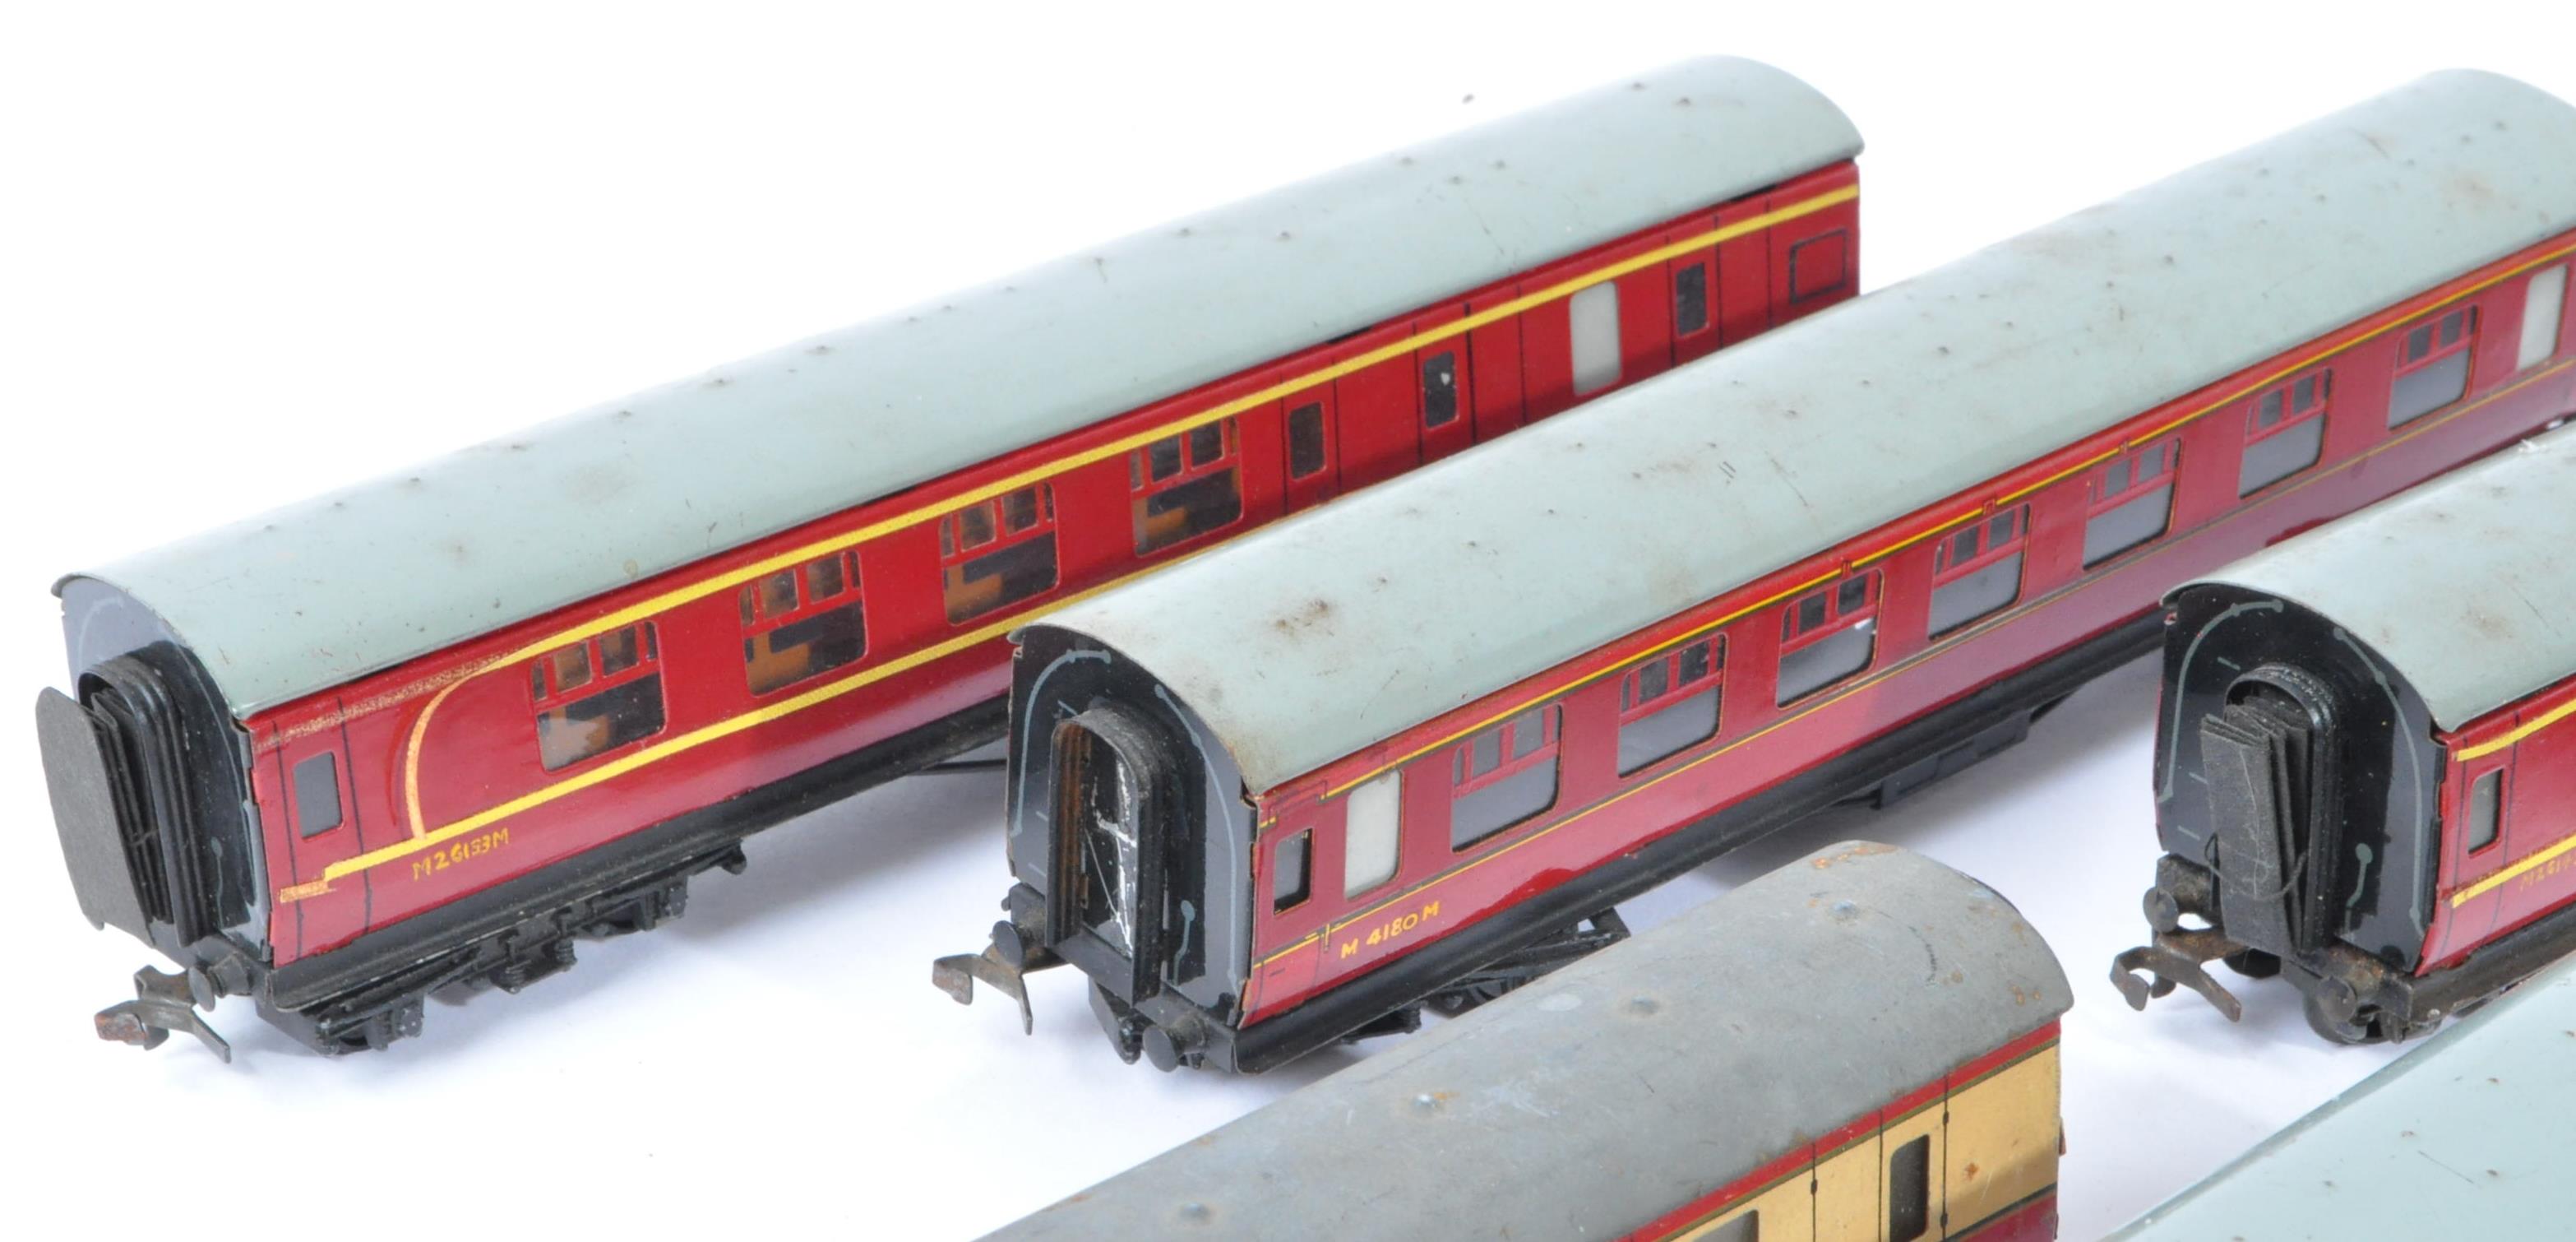 COLLECTION OF HORNBY DUBLO MODEL RAILWAY TRAINSET CARRIAGES - Image 2 of 5